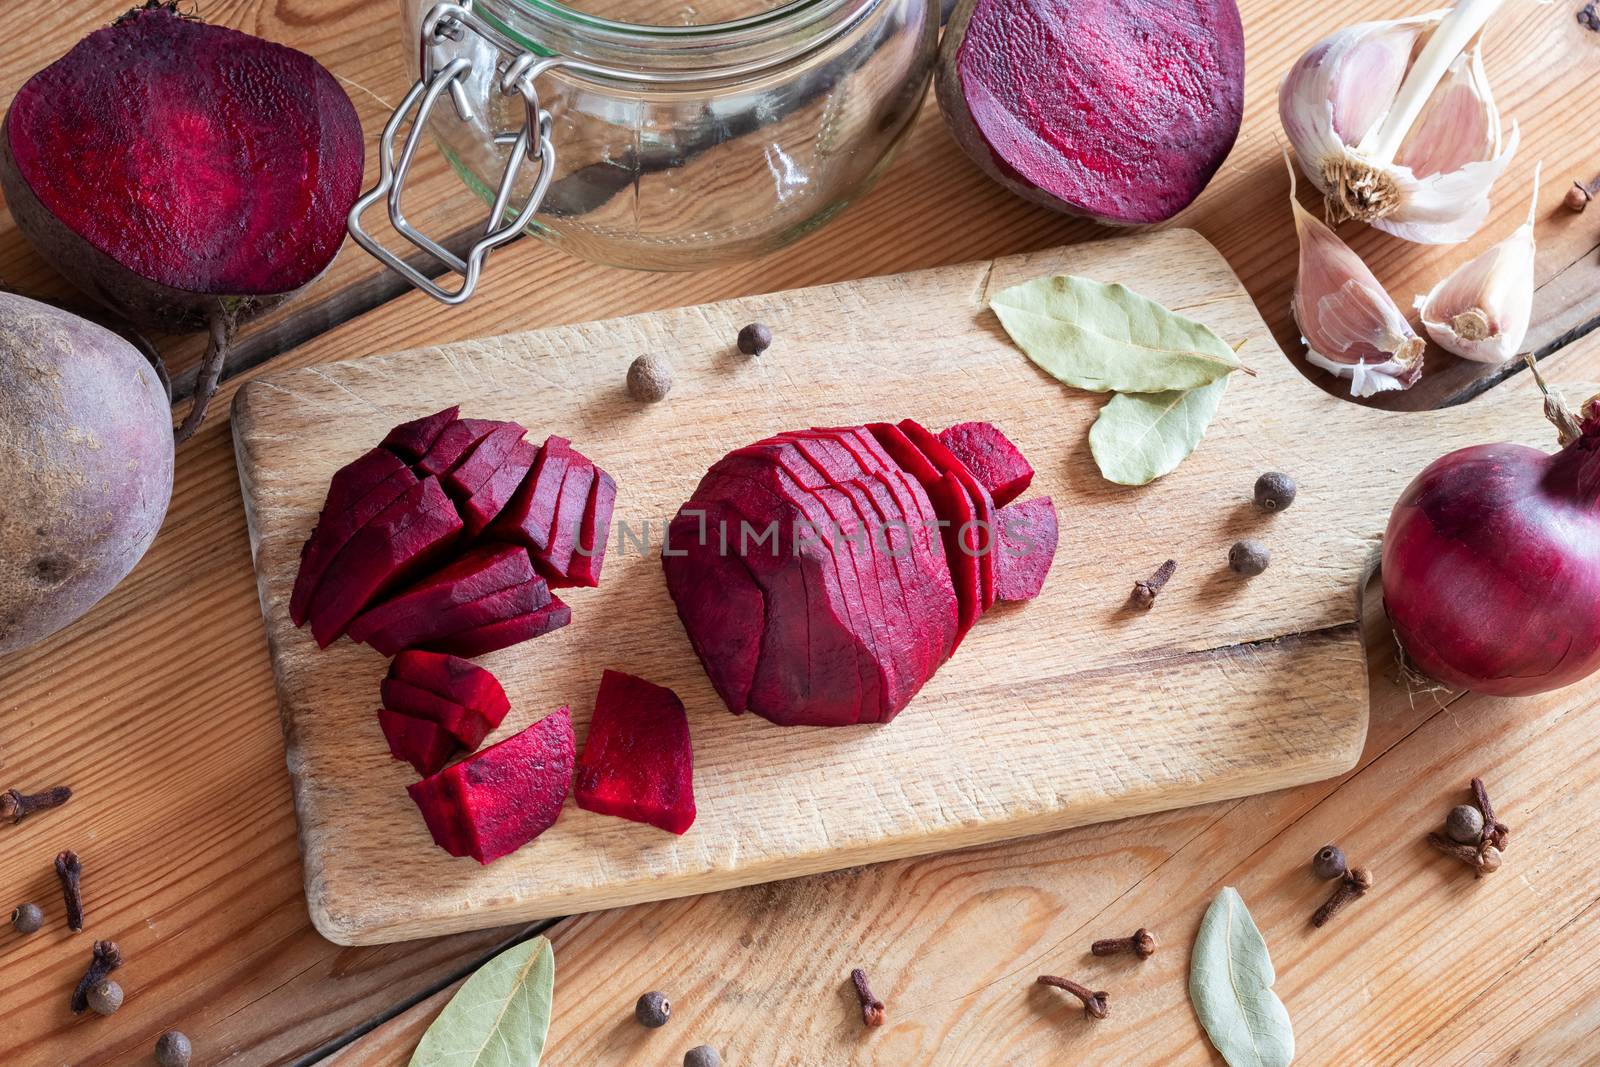 Sliced red beets with garlic and spices - ingredients to prepare fermented kvass